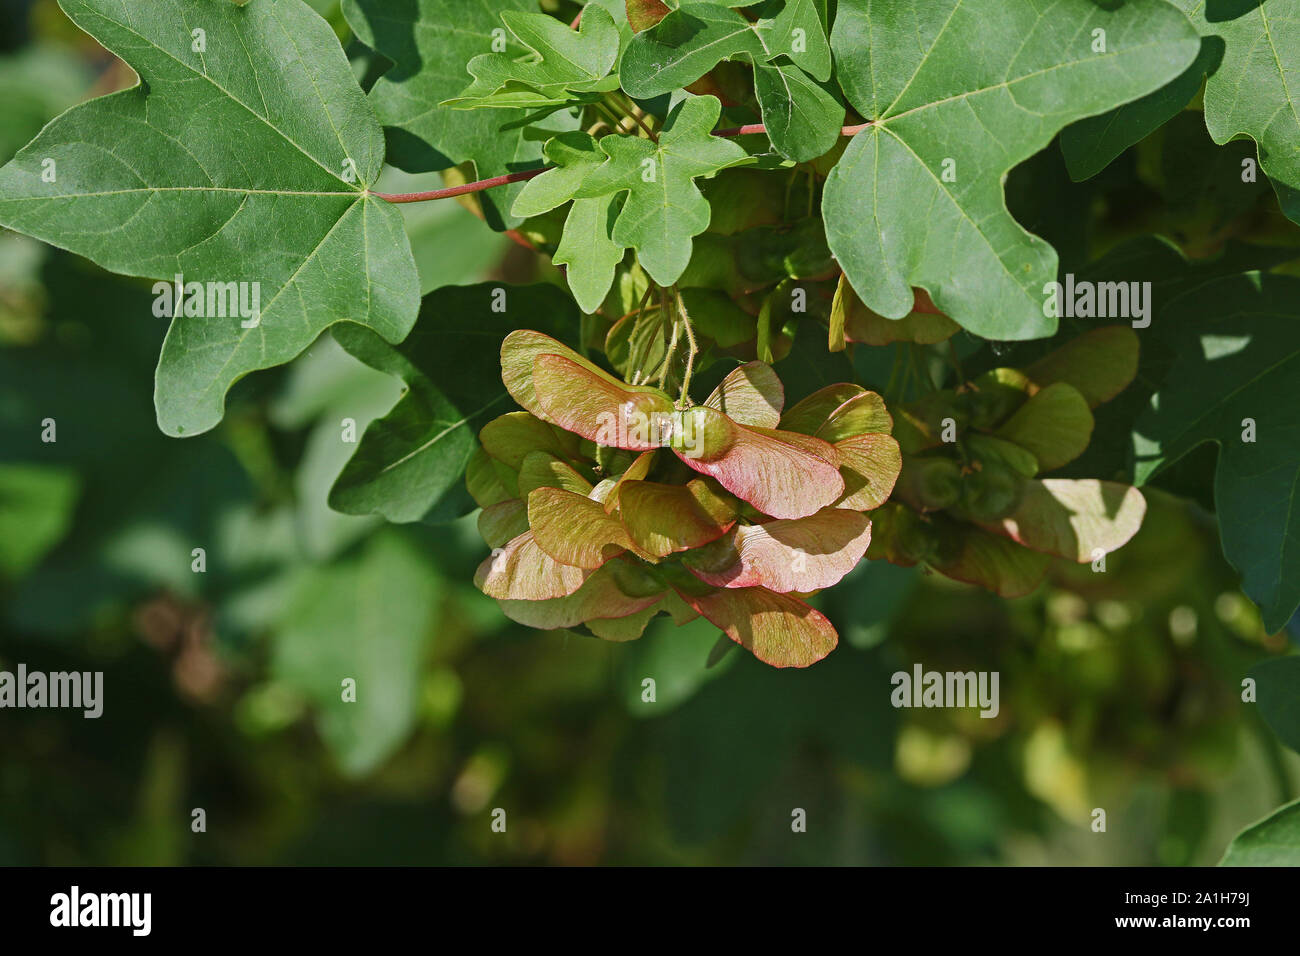 ripening maple or sycamore seed very close up Latin acer opalus or pseudoplatanus in springtime Italy Stock Photo